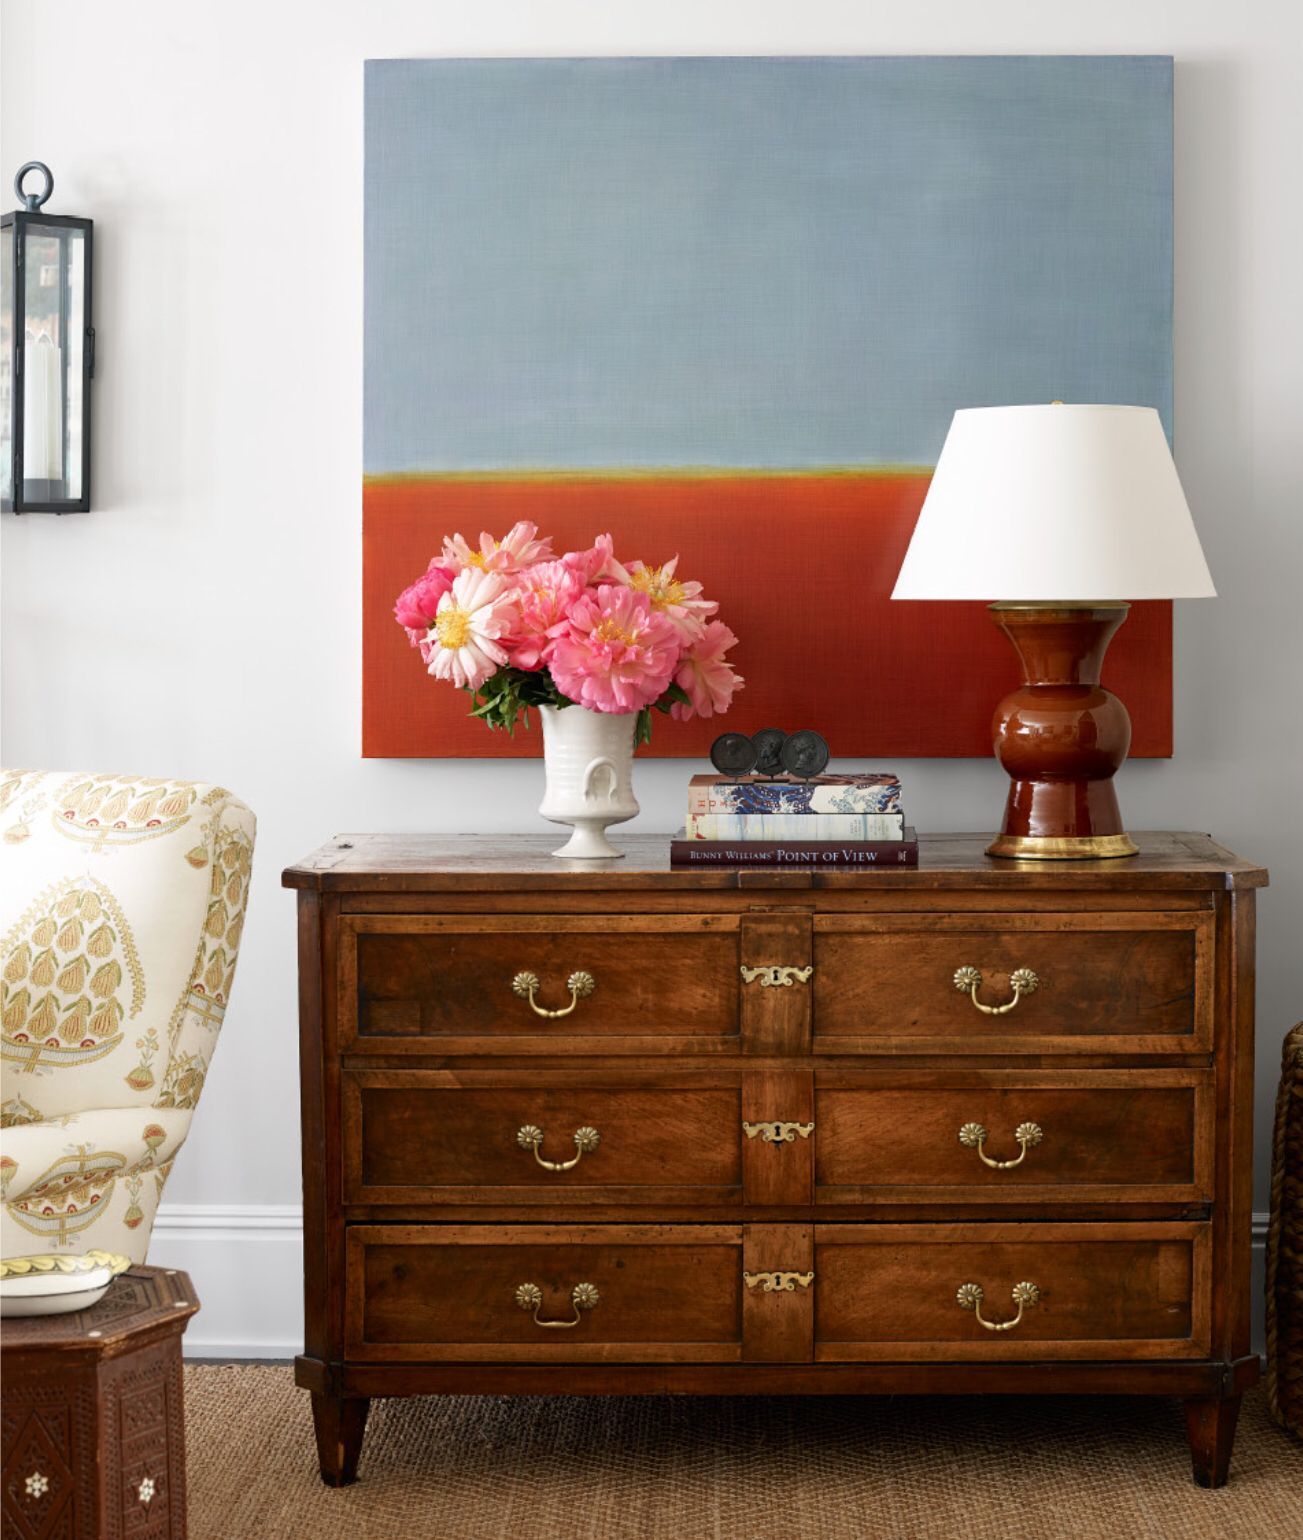 Traditional chest with abstract artв™Ґ -   25 antique decor traditional
 ideas